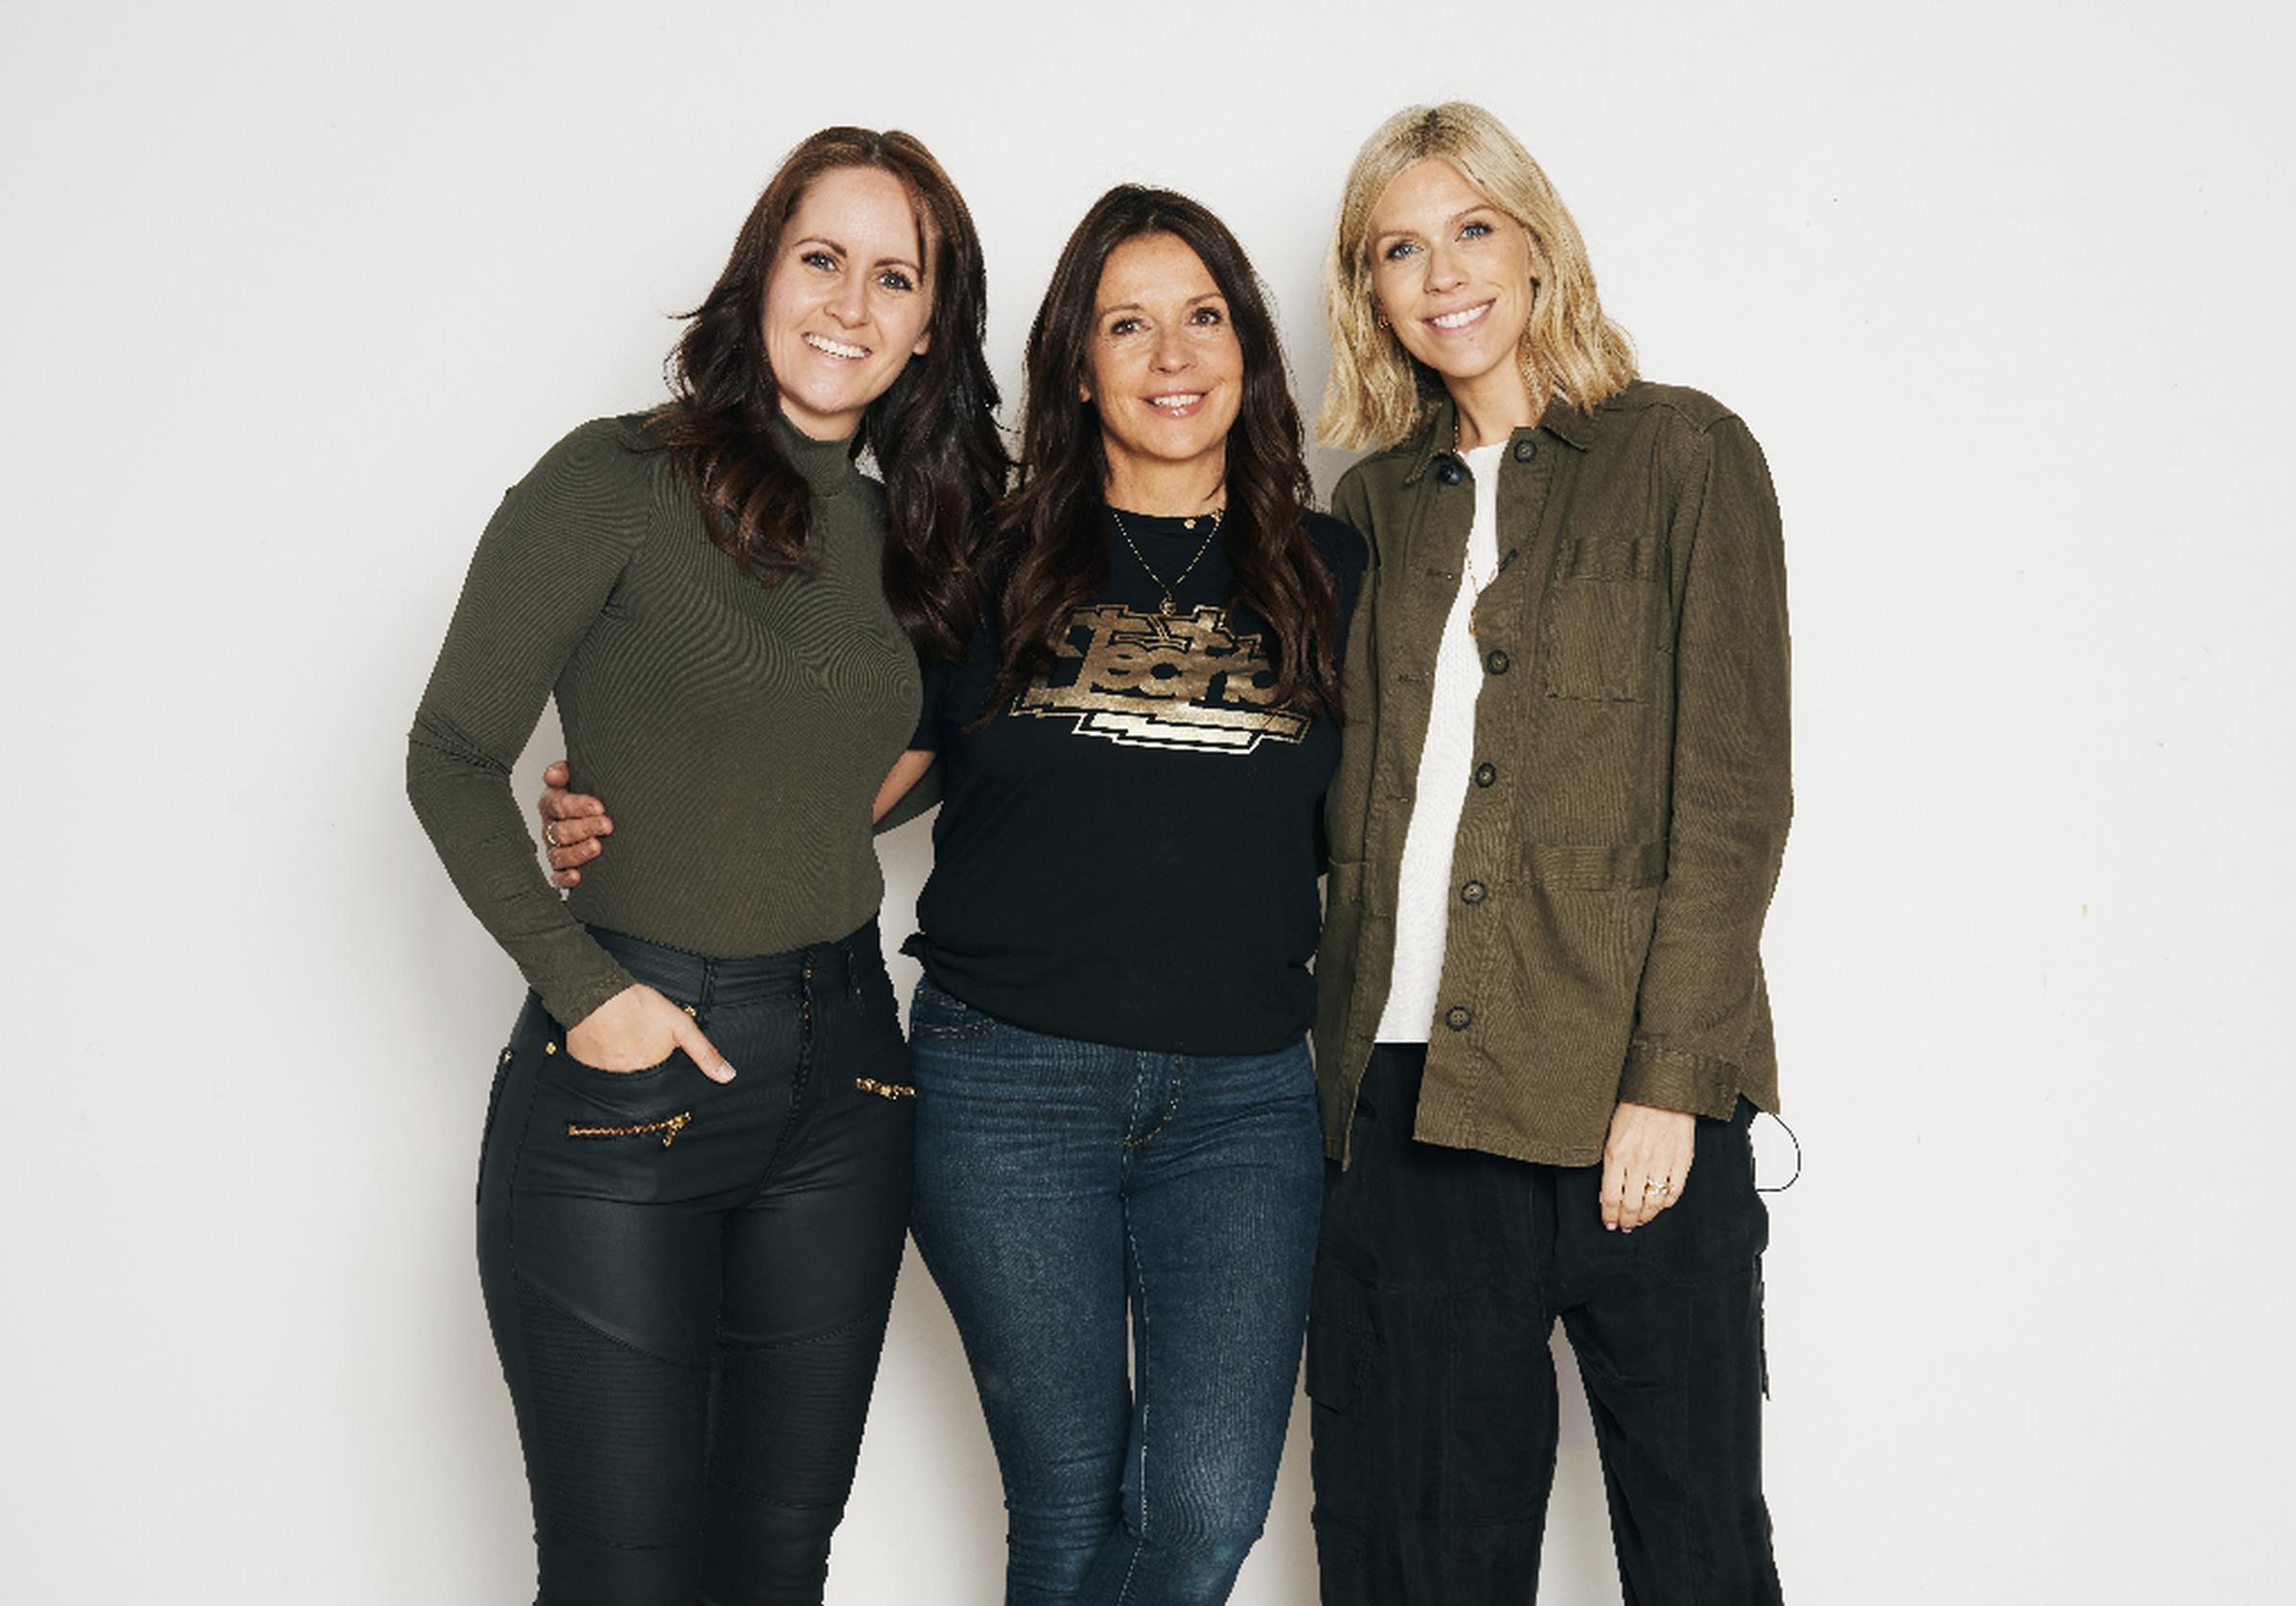 Electrifying.com is a multi-channel media platform and electric car marketplace founded by journalist and TV presenter Ginny Buckley, who reviews vehicles along with fellow journalist and presenters Nicki Shields and Nicola Hume